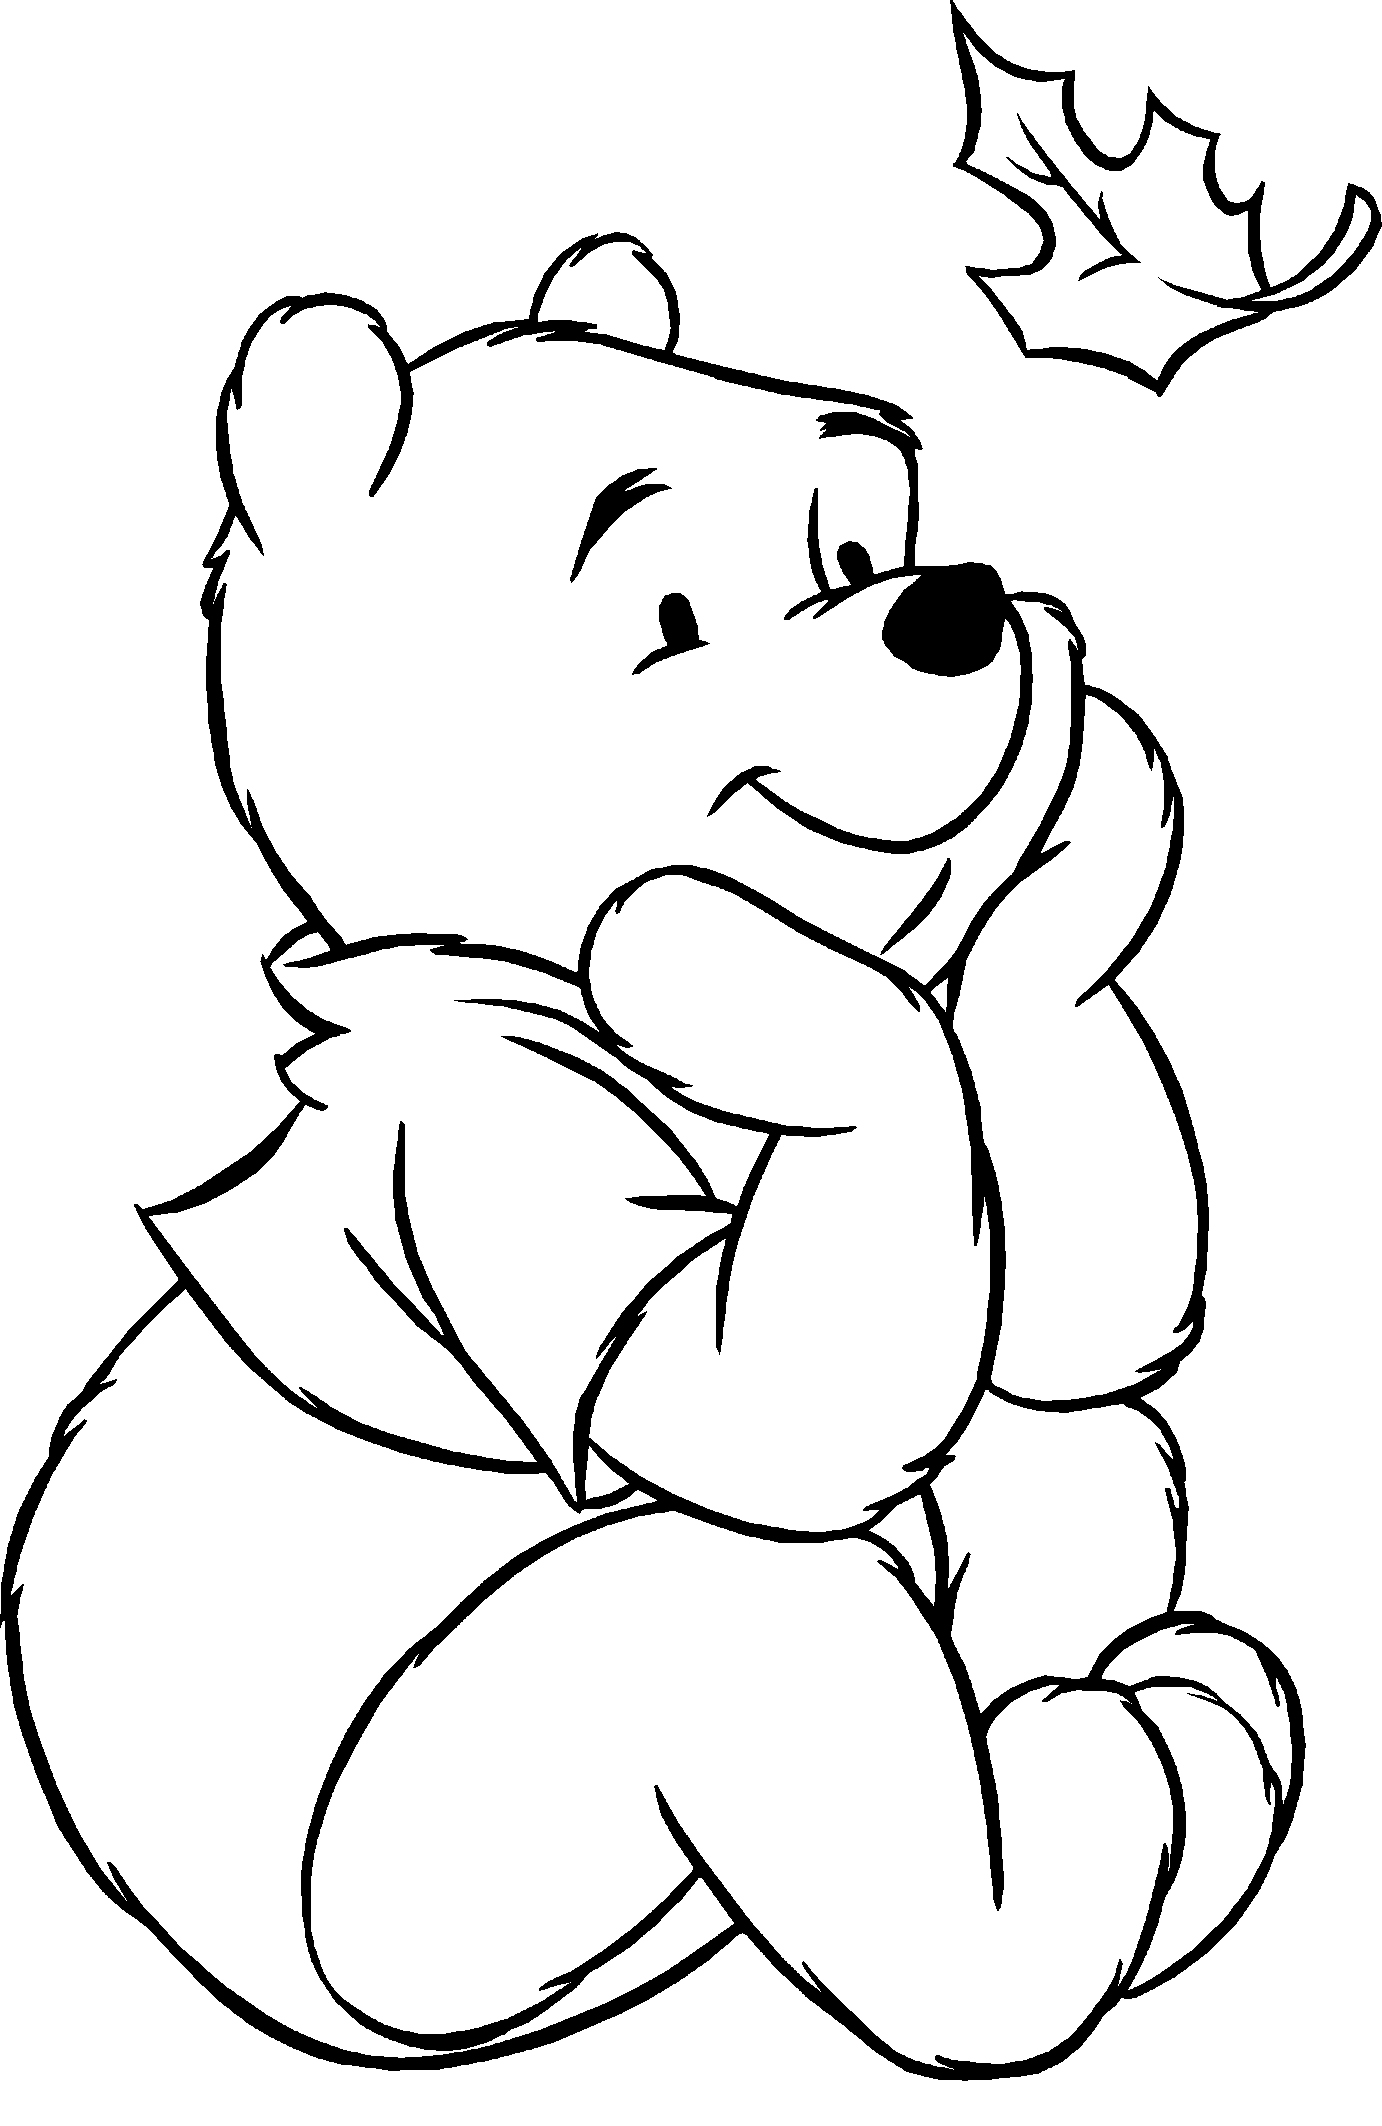 Winnie The Pooh Coloring Pages (4) - Coloring Kids